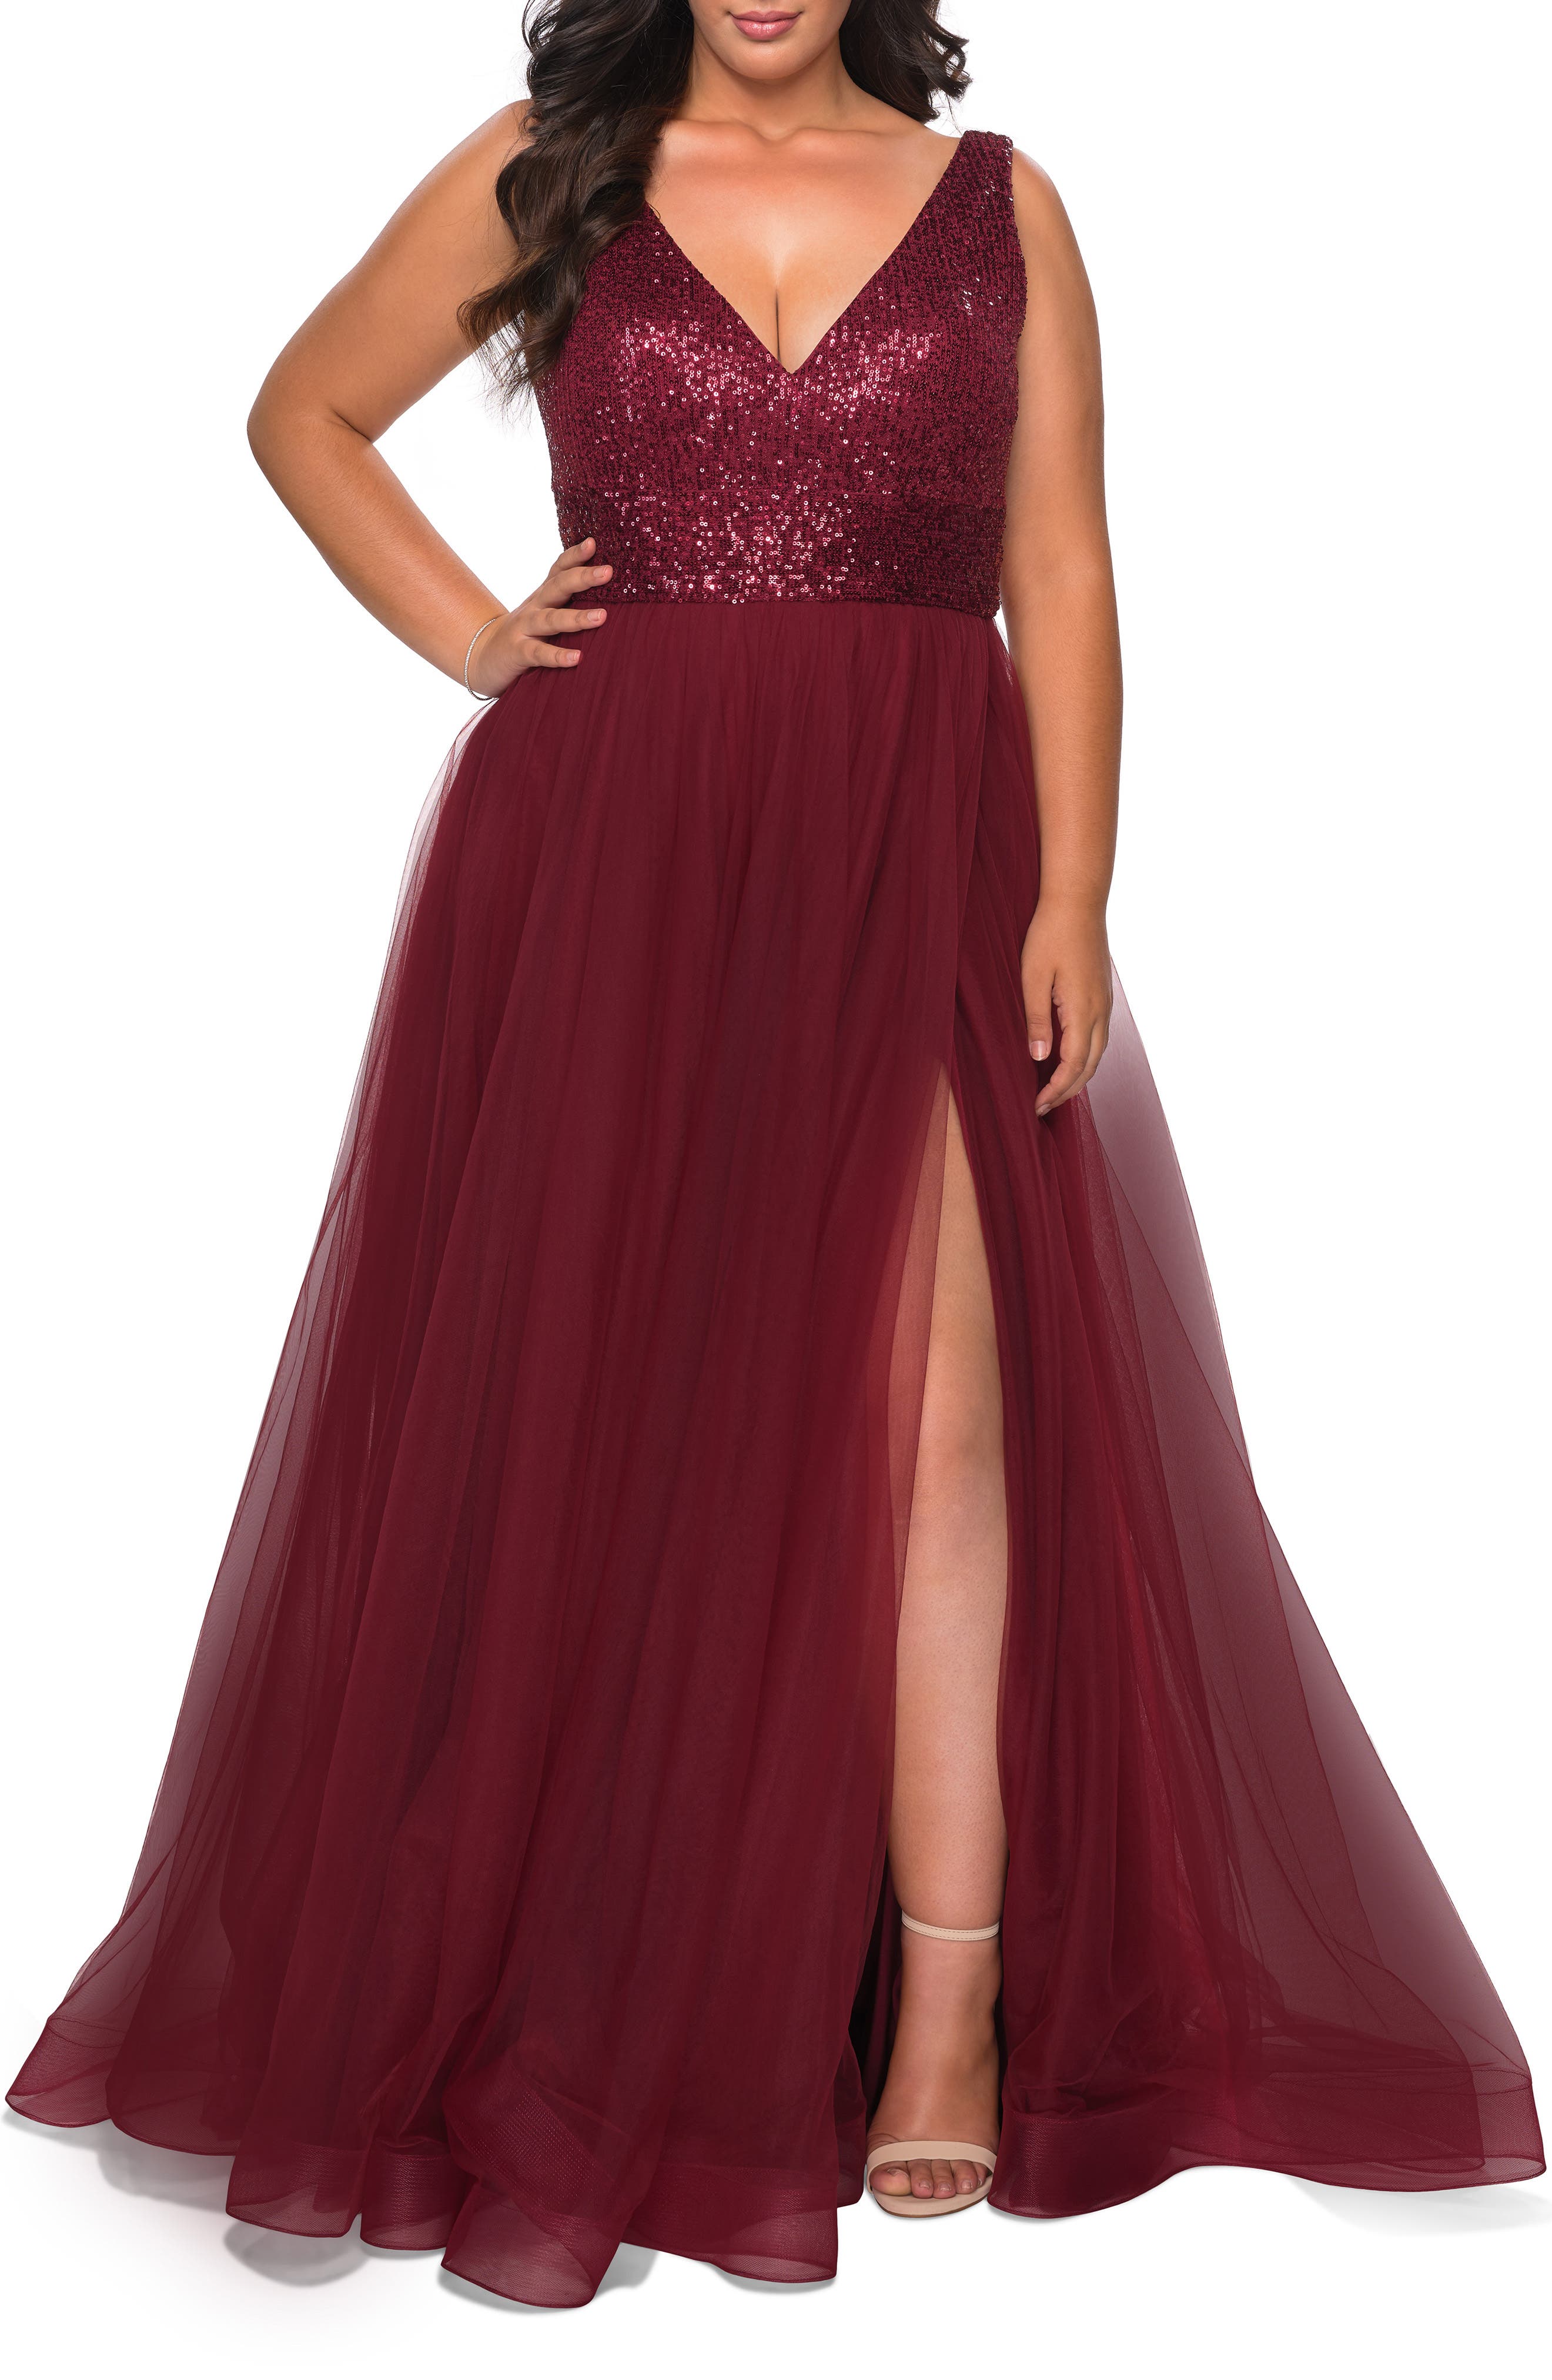 plus size evening dresses next day delivery